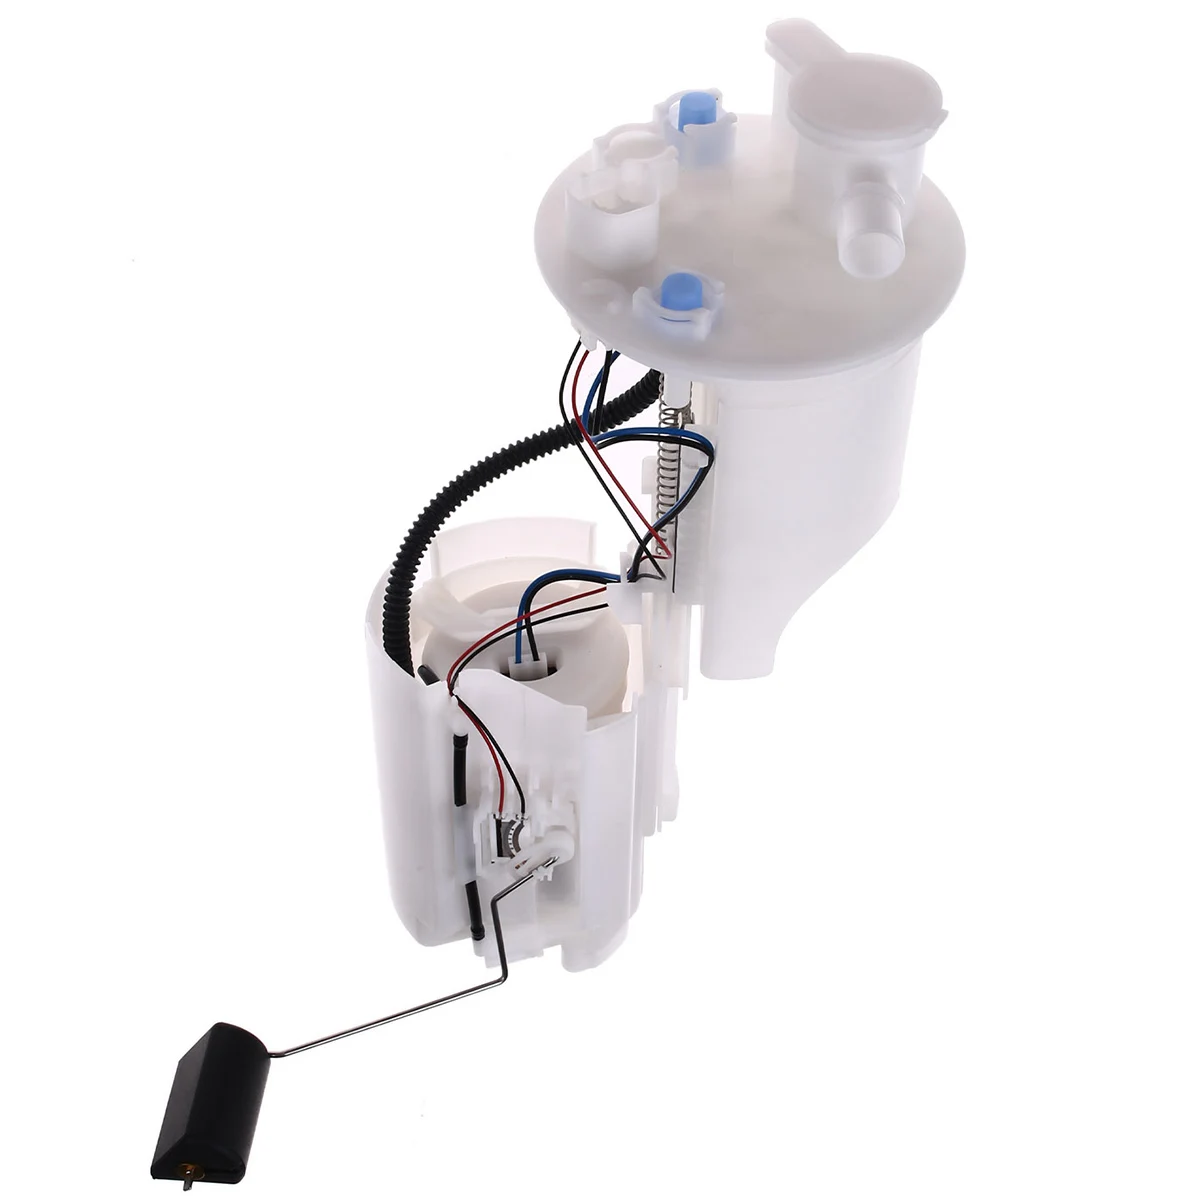 

In-stock CN US Fuel Pump Module Assembly with Sending Unit for Toyota Avalon Camry L4 2.5L 13-17 7702006286